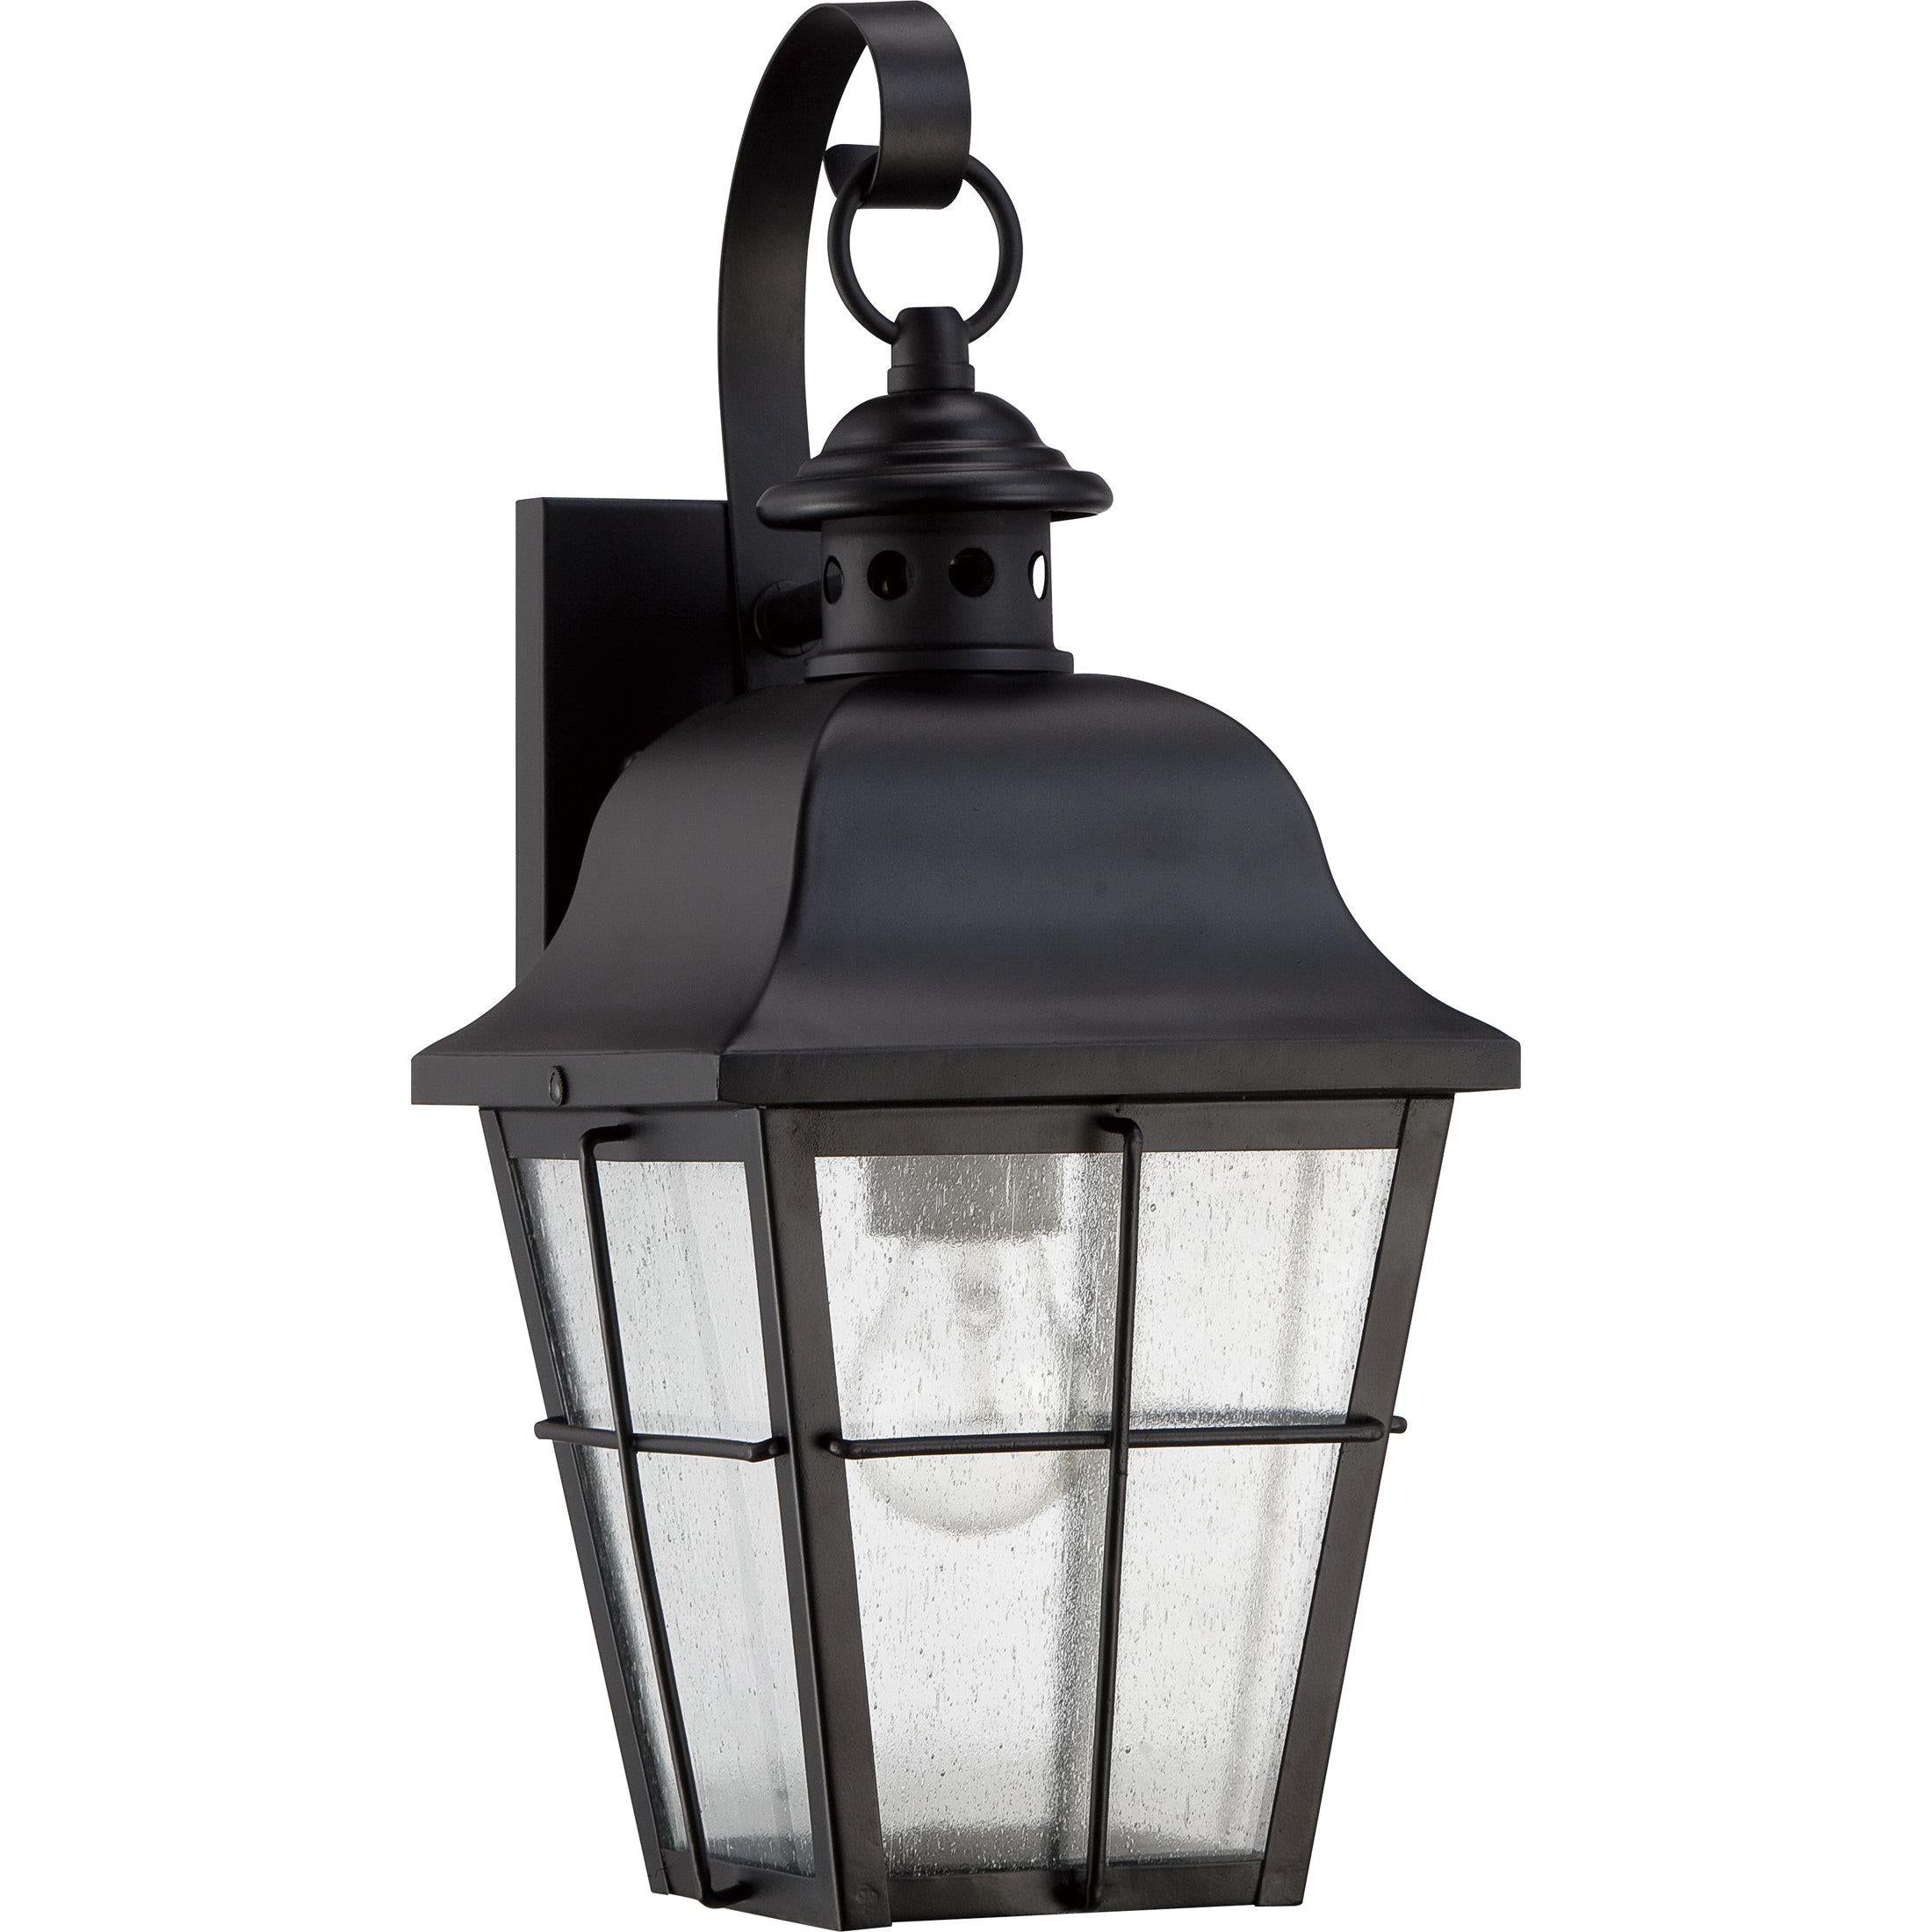 Quoizel  Millhouse Outdoor Lantern, Small Outdoor l Wall Quoizel   